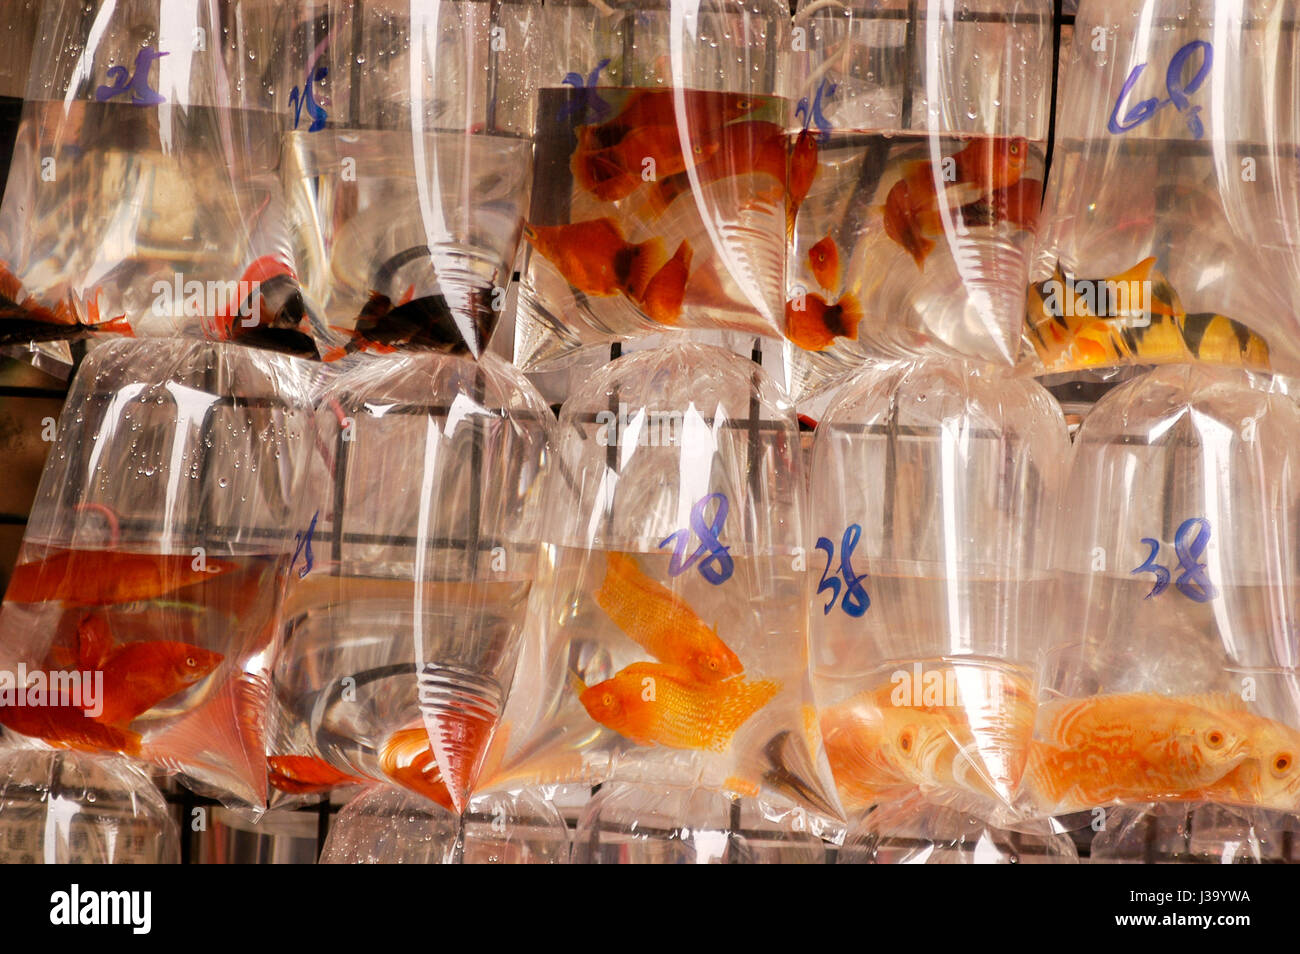 Live fish for sale in plastic bags in a Hong Kong market Stock Photo - Alamy